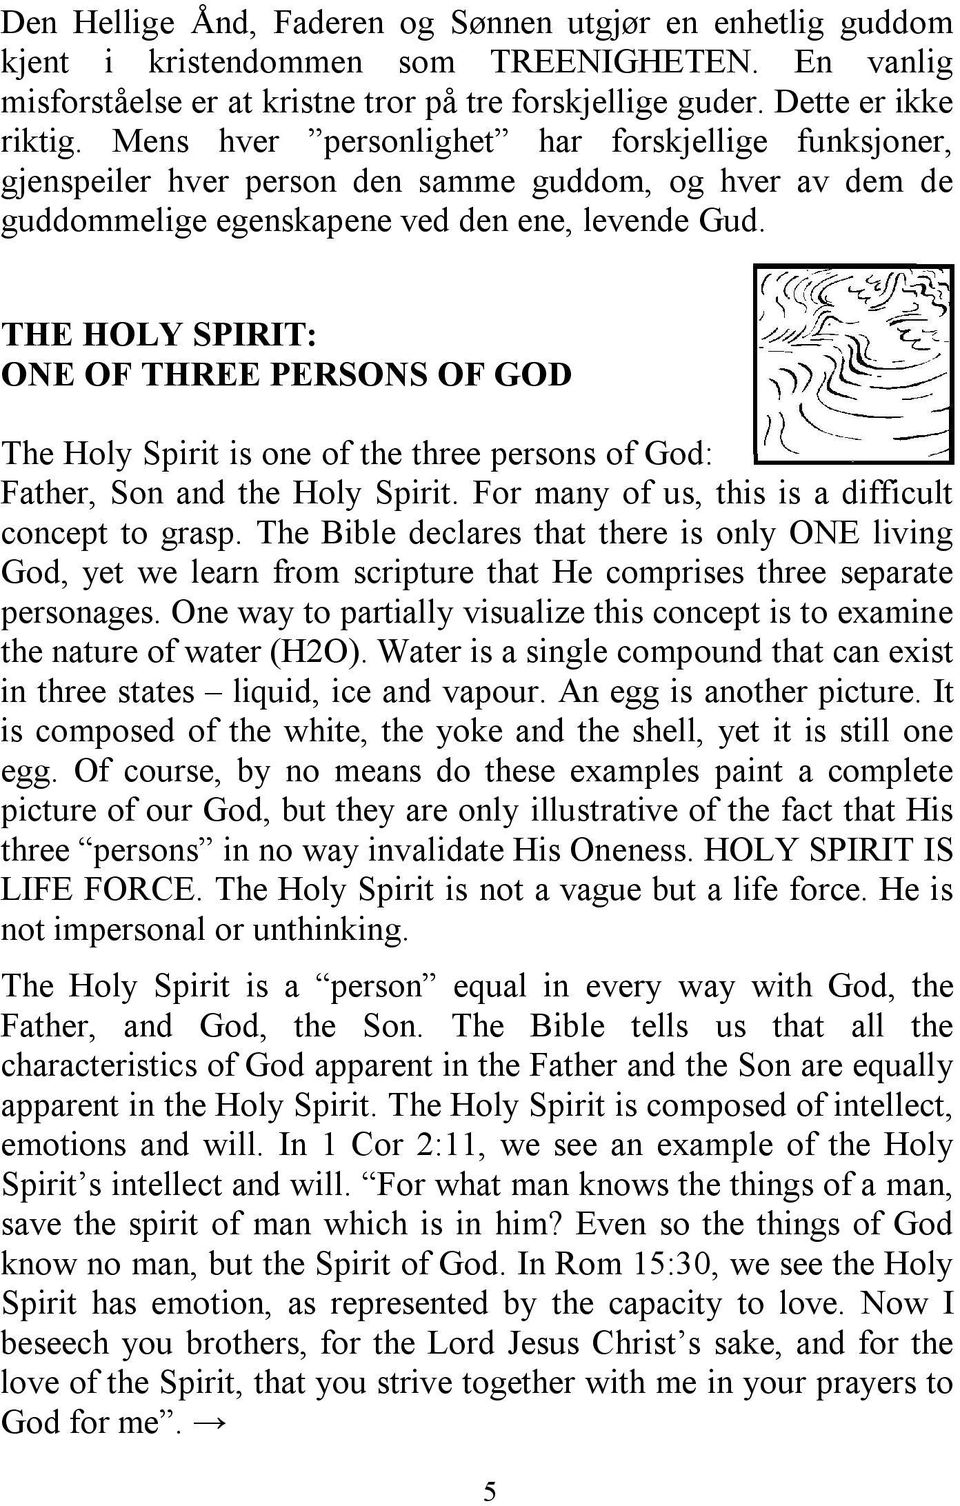 THE HOLY SPIRIT: ONE OF THREE PERSONS OF GOD The Holy Spirit is one of the three persons of God: Father, Son and the Holy Spirit. For many of us, this is a difficult concept to grasp.